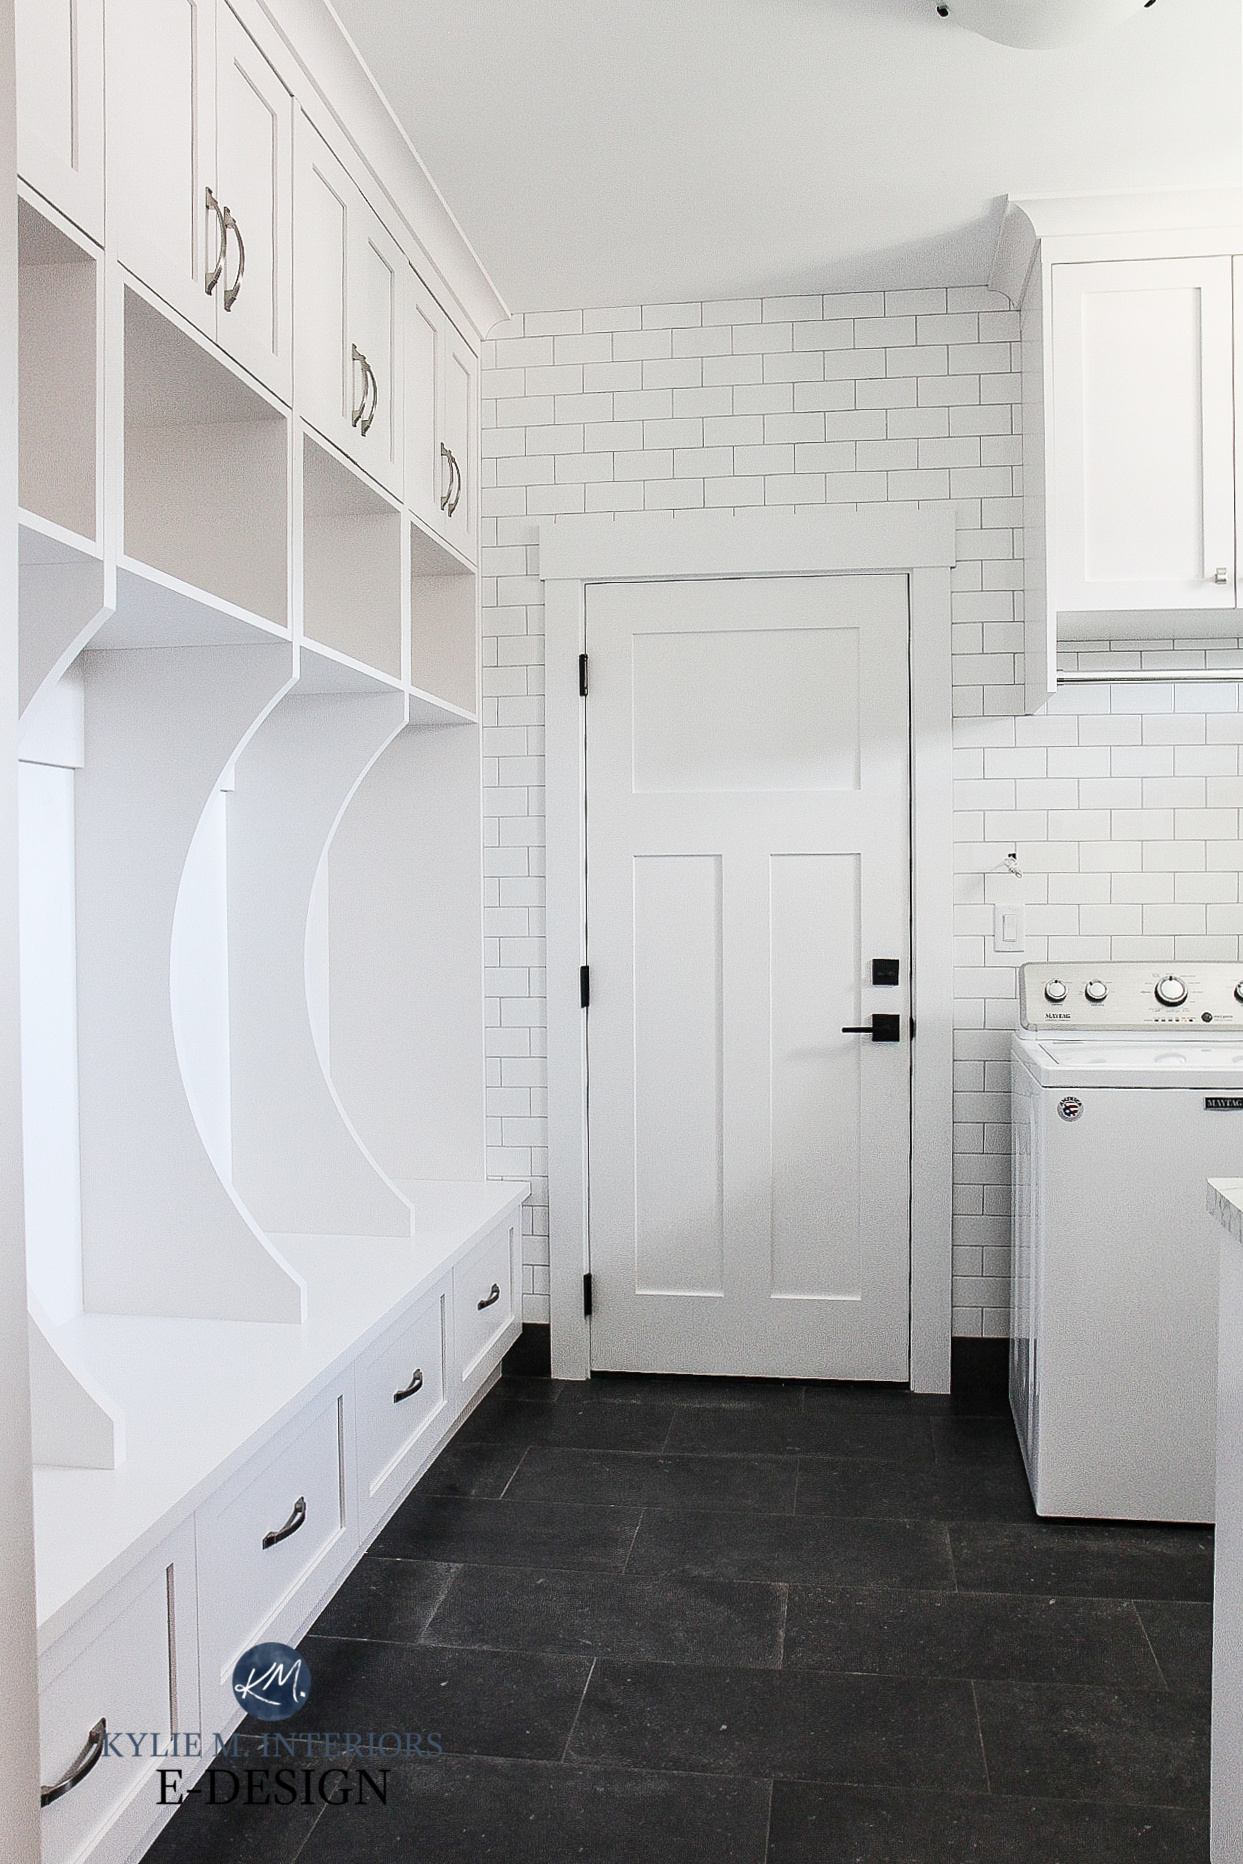 White laundry room with mud room built-in benchs, hooks, cubbies, white subway tile, gray tile floor. Sherwin Williams High Reflective White, Kylie M Interiors online paint color consultant